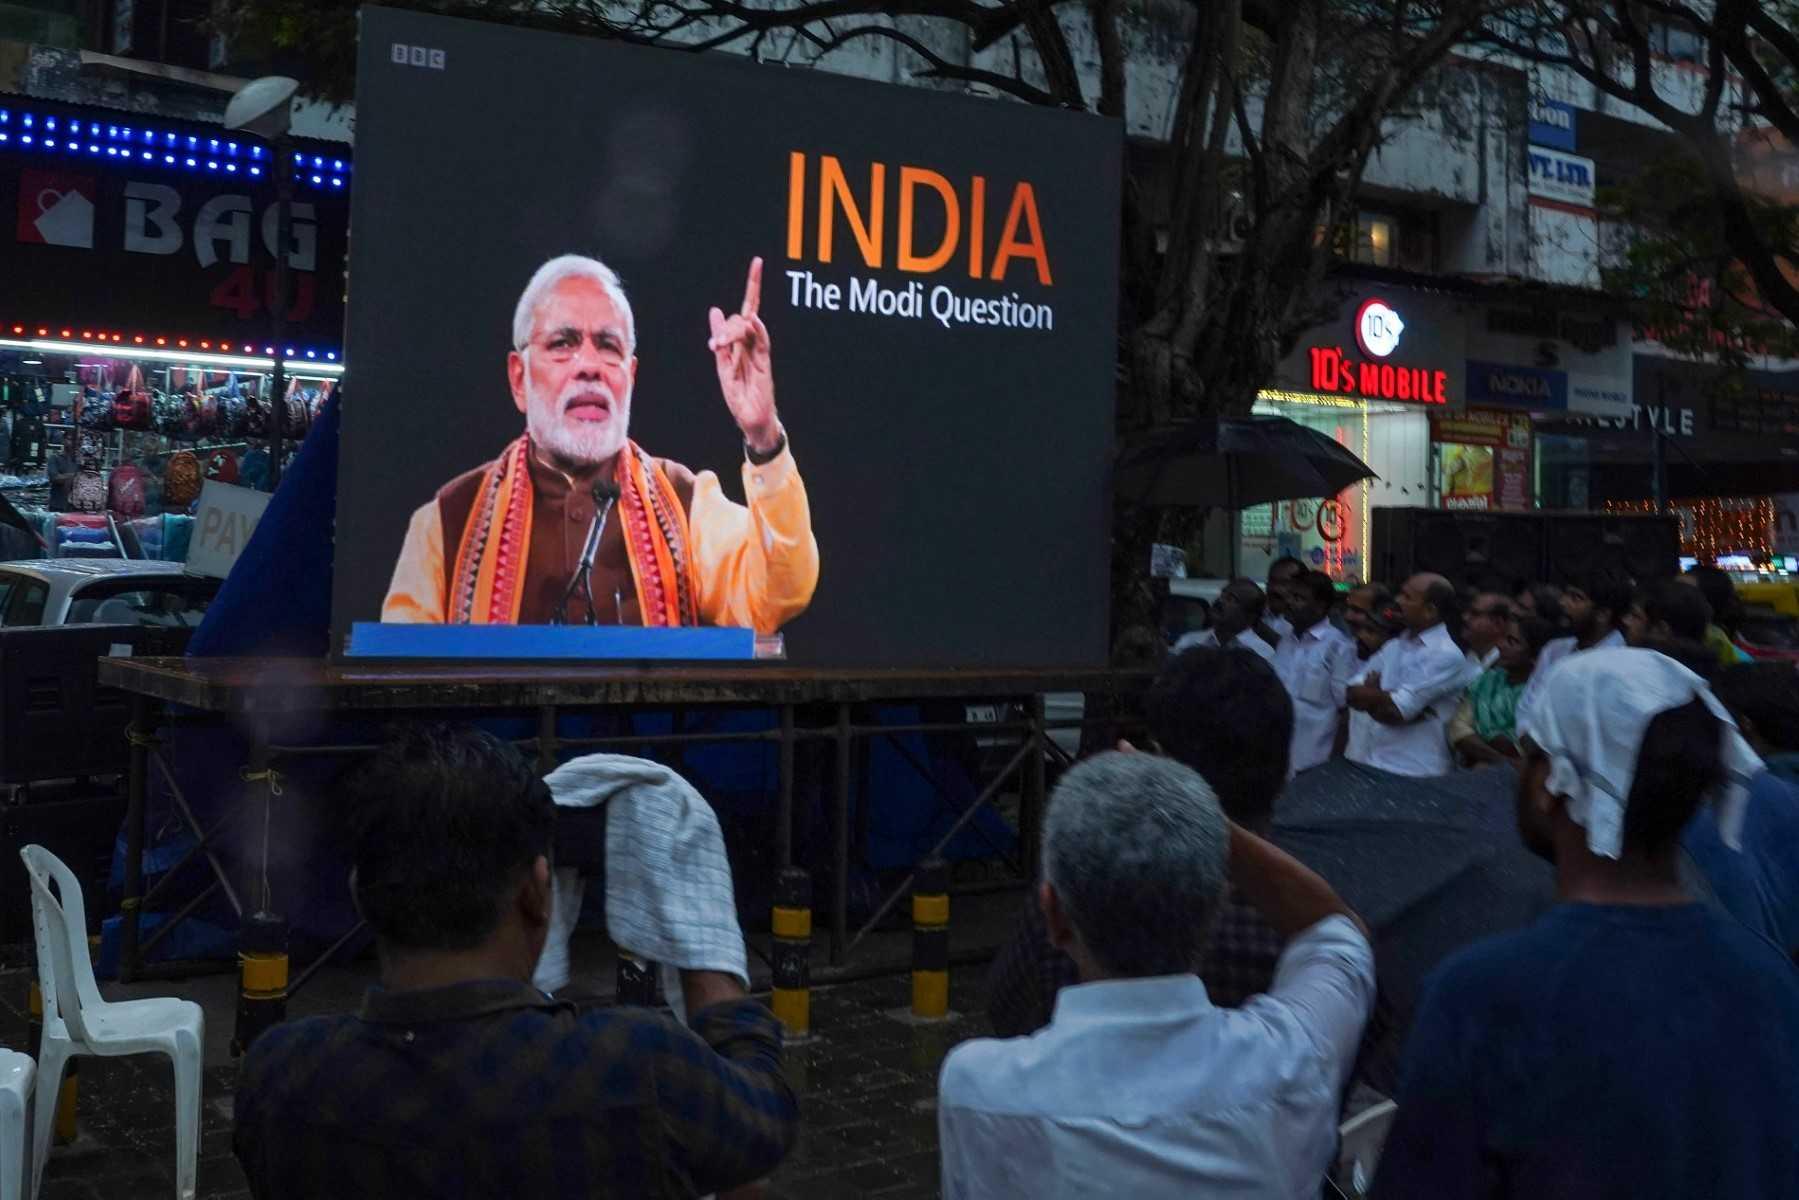 People watch the BBC documentary 'India: The Modi Question', on a screen installed at the Marine Drive junction under the direction of the district congress committee, in Kochi on Jan 24. Photo: AFP